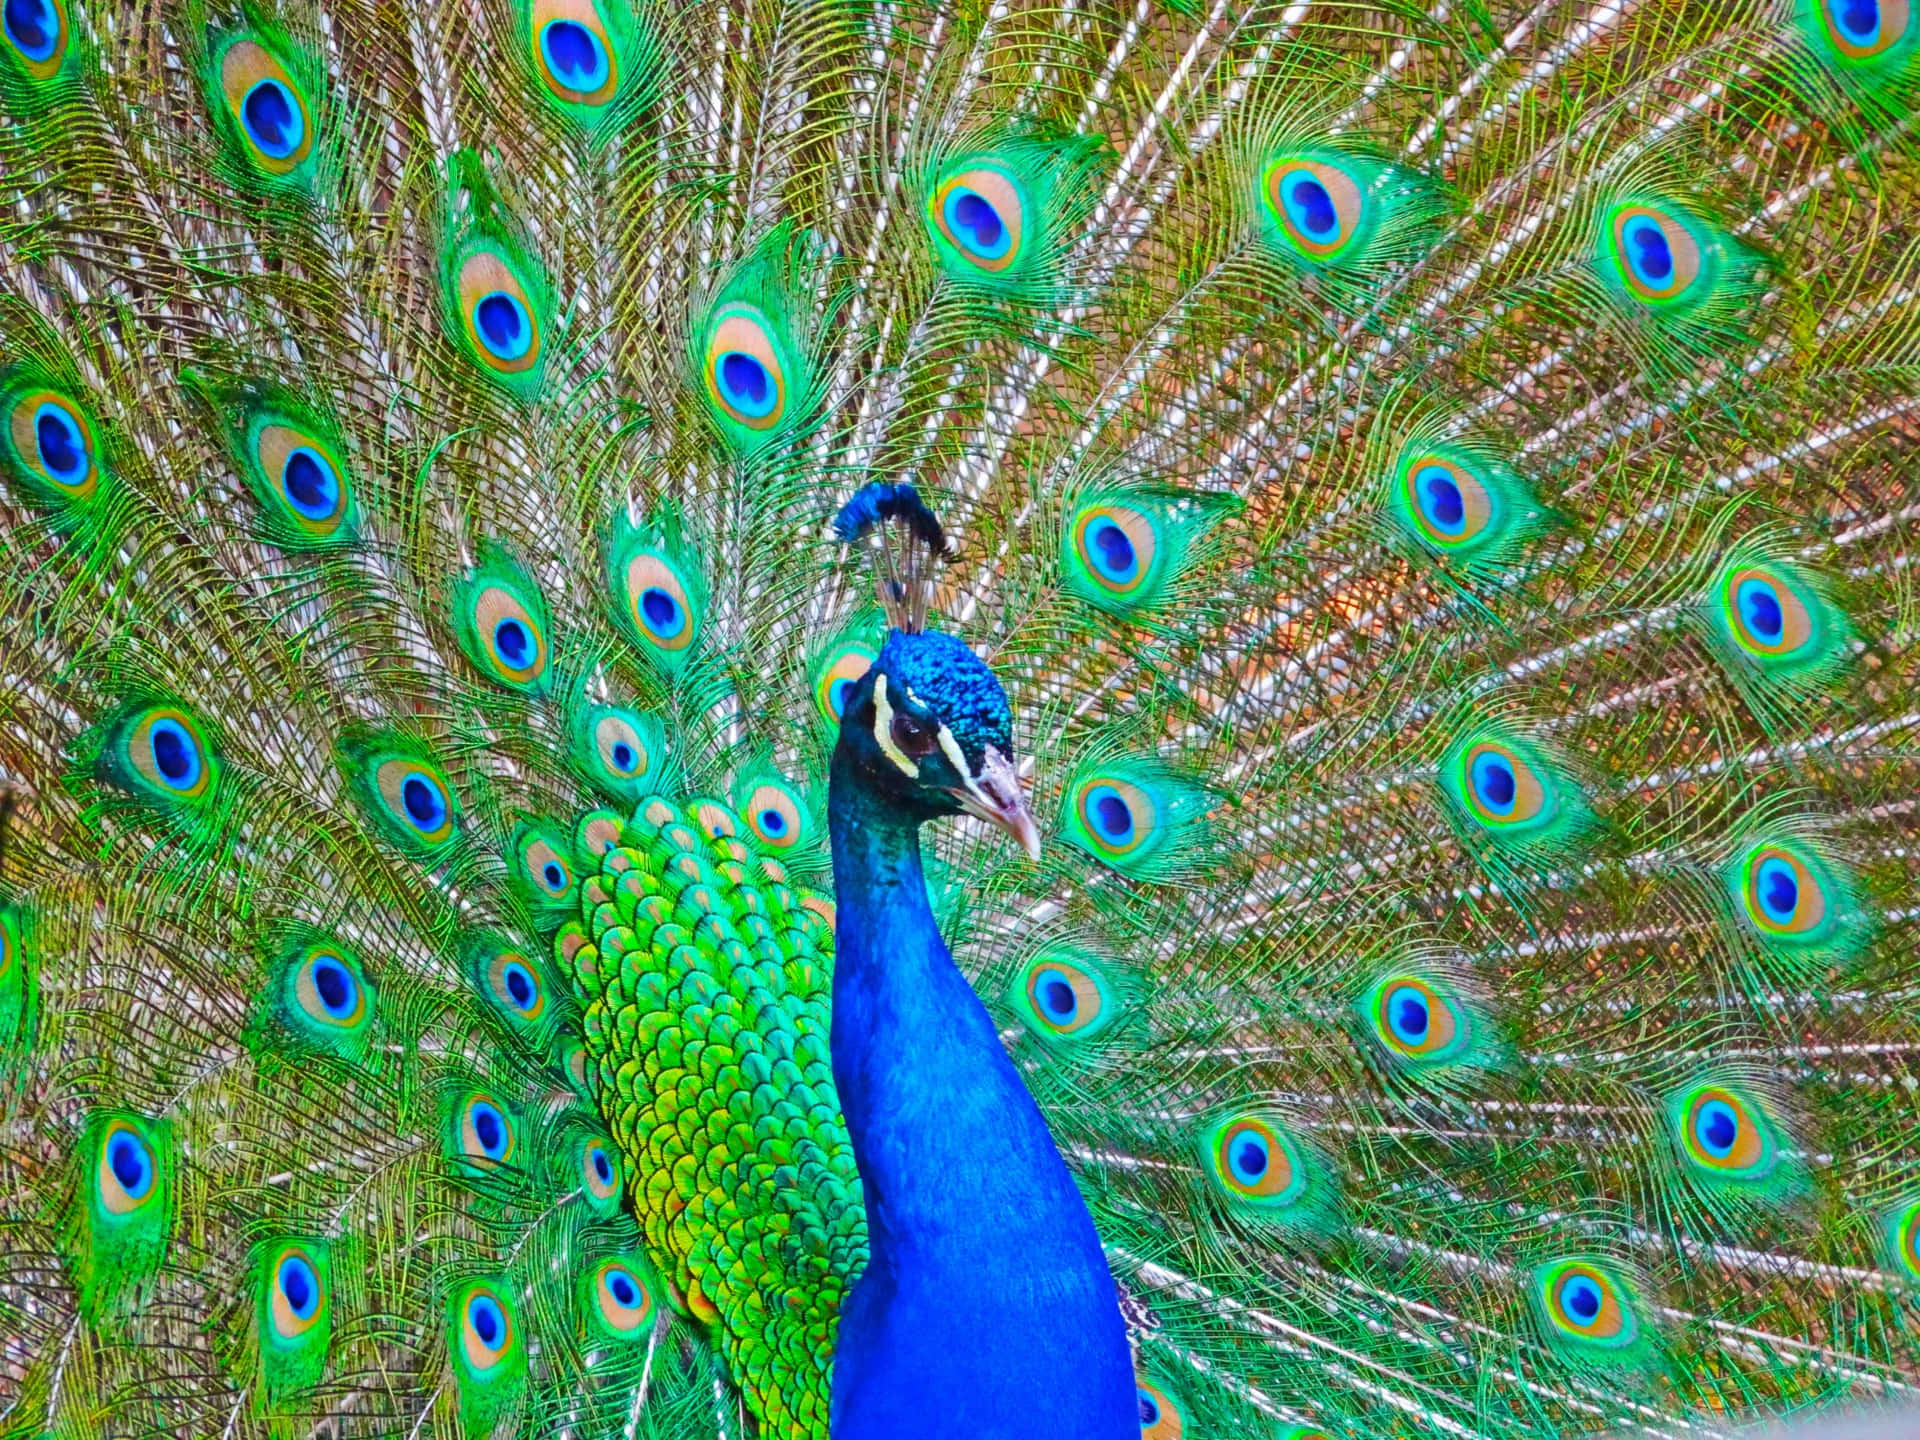 Colorful beauty of a Peacock!